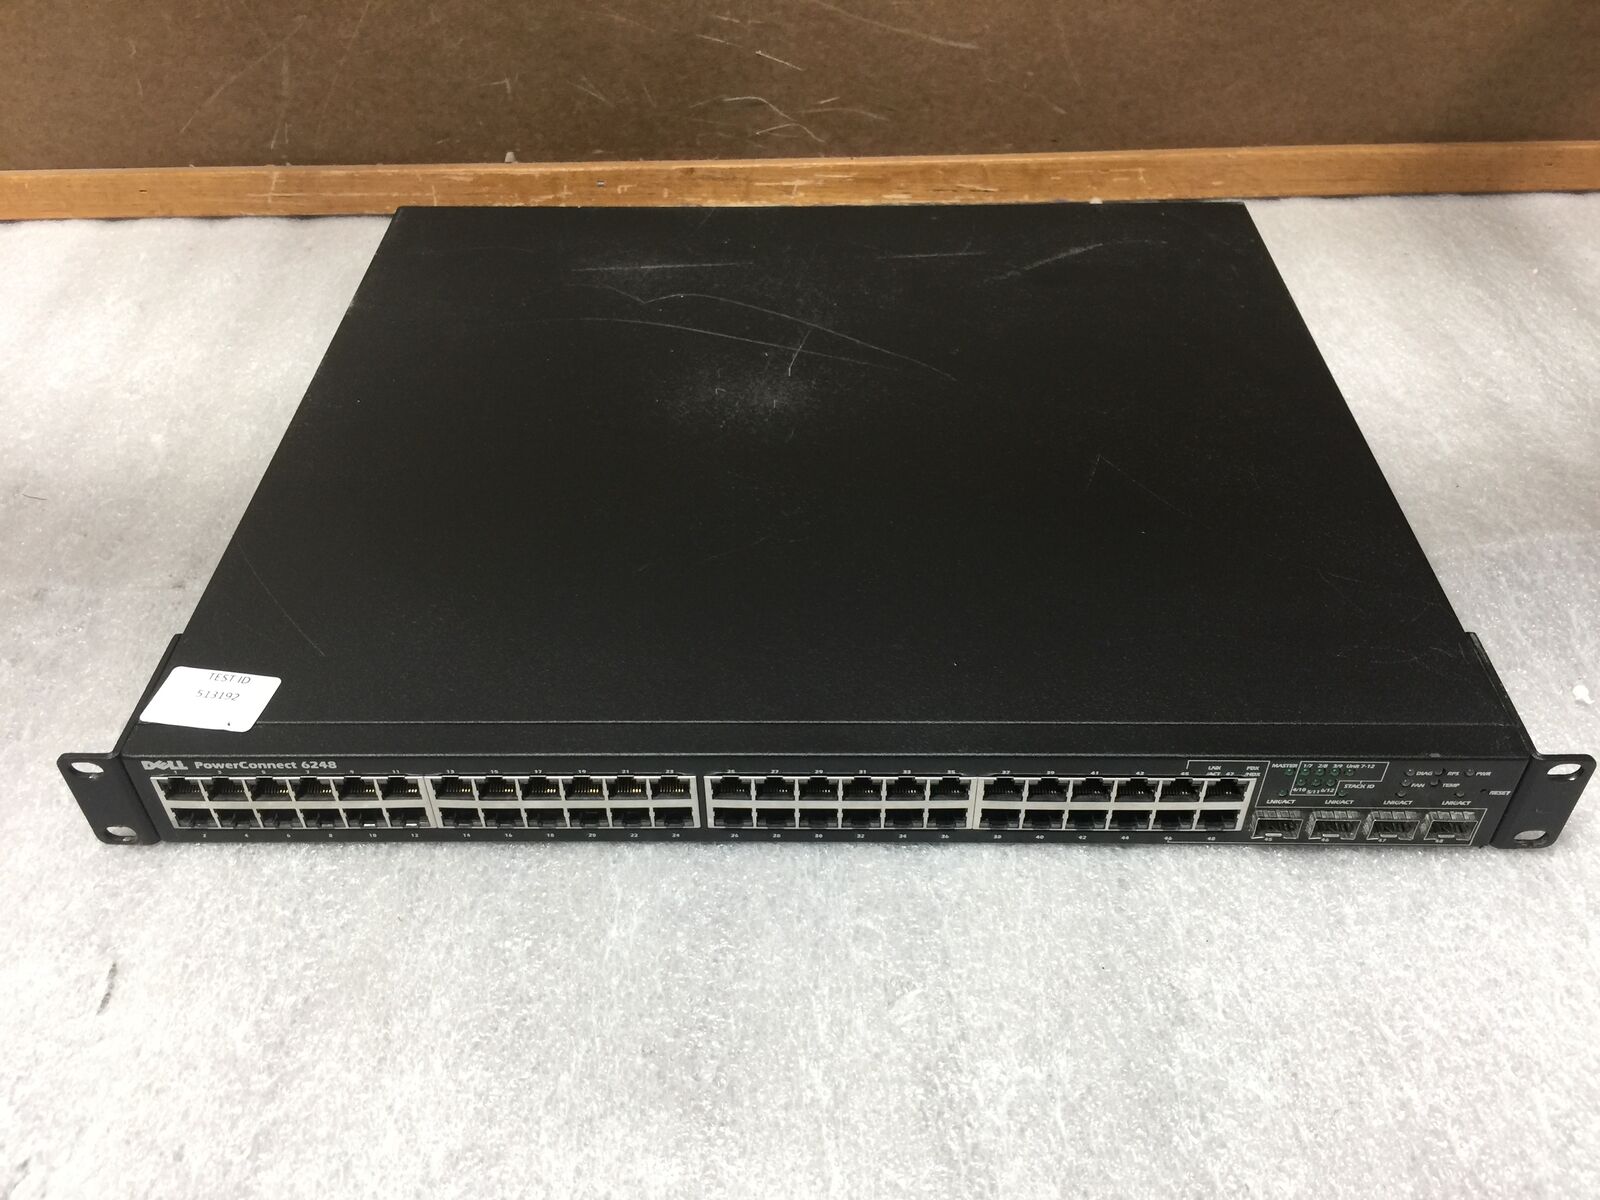 Dell PowerConnect 6248 48-port Gigabit Ethernet Layer 3 Switch, Tested/Reset